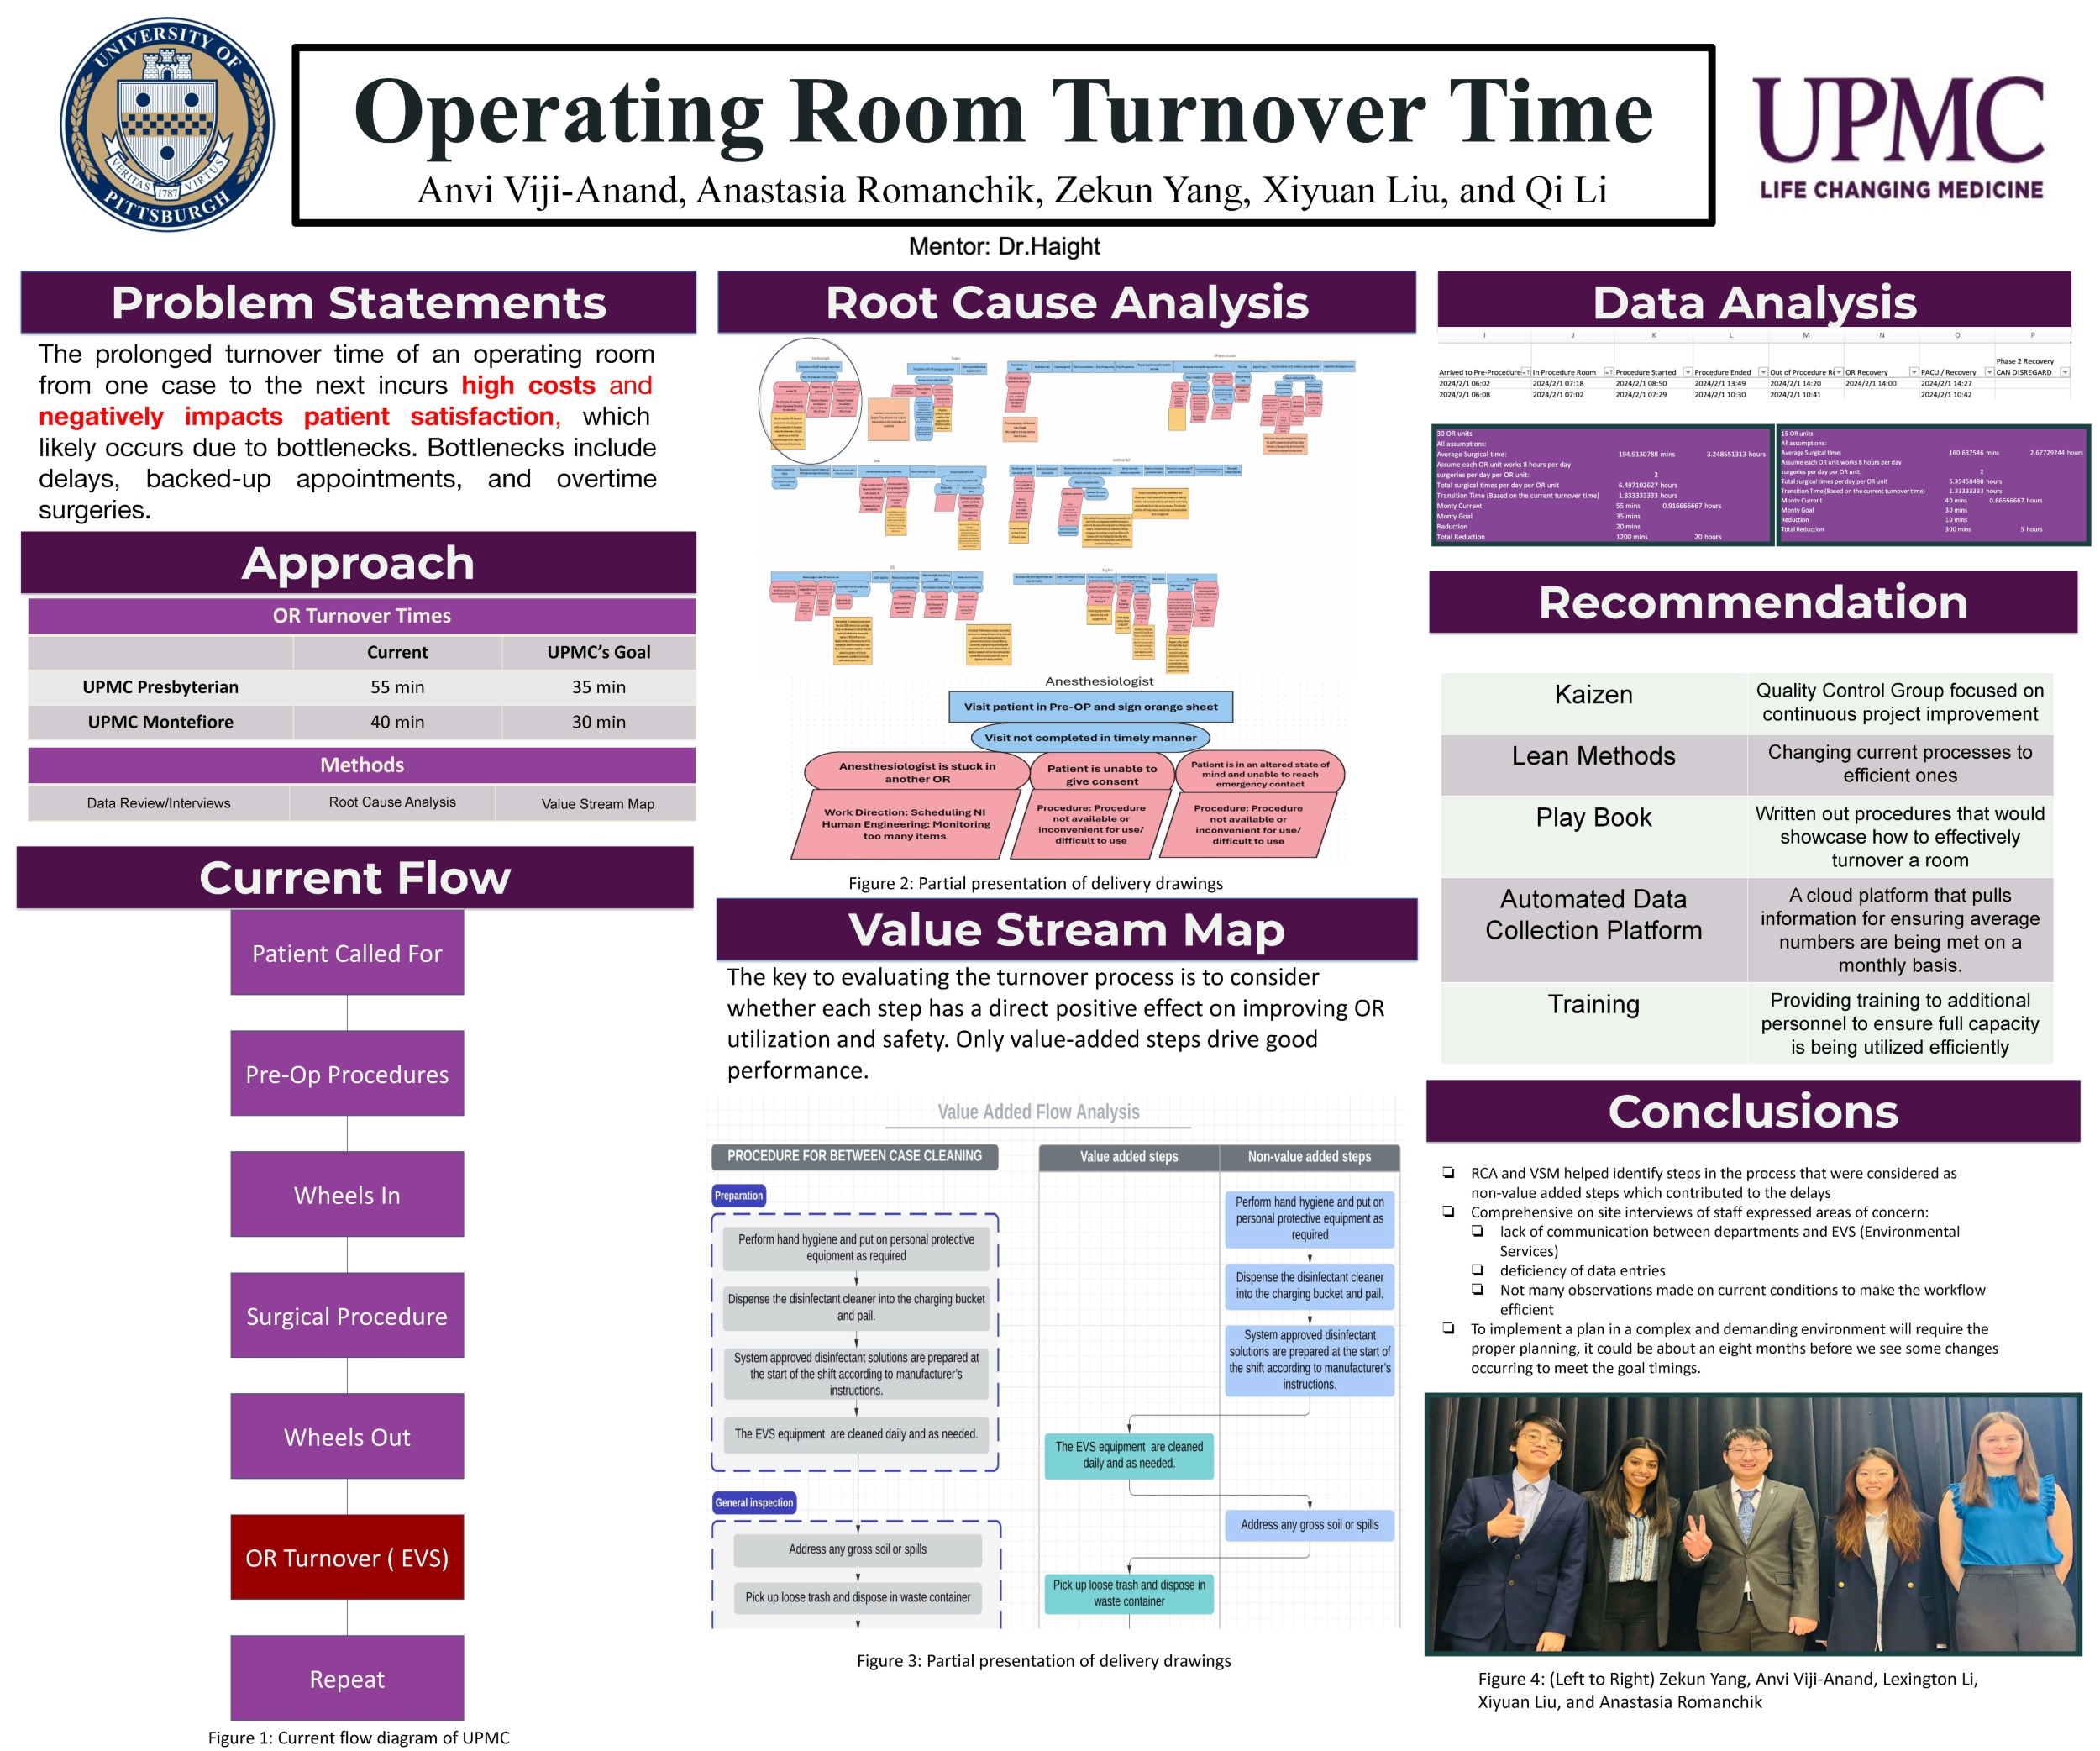 UPMC Operating Room Turnover Time research poster showing overview of the research findings